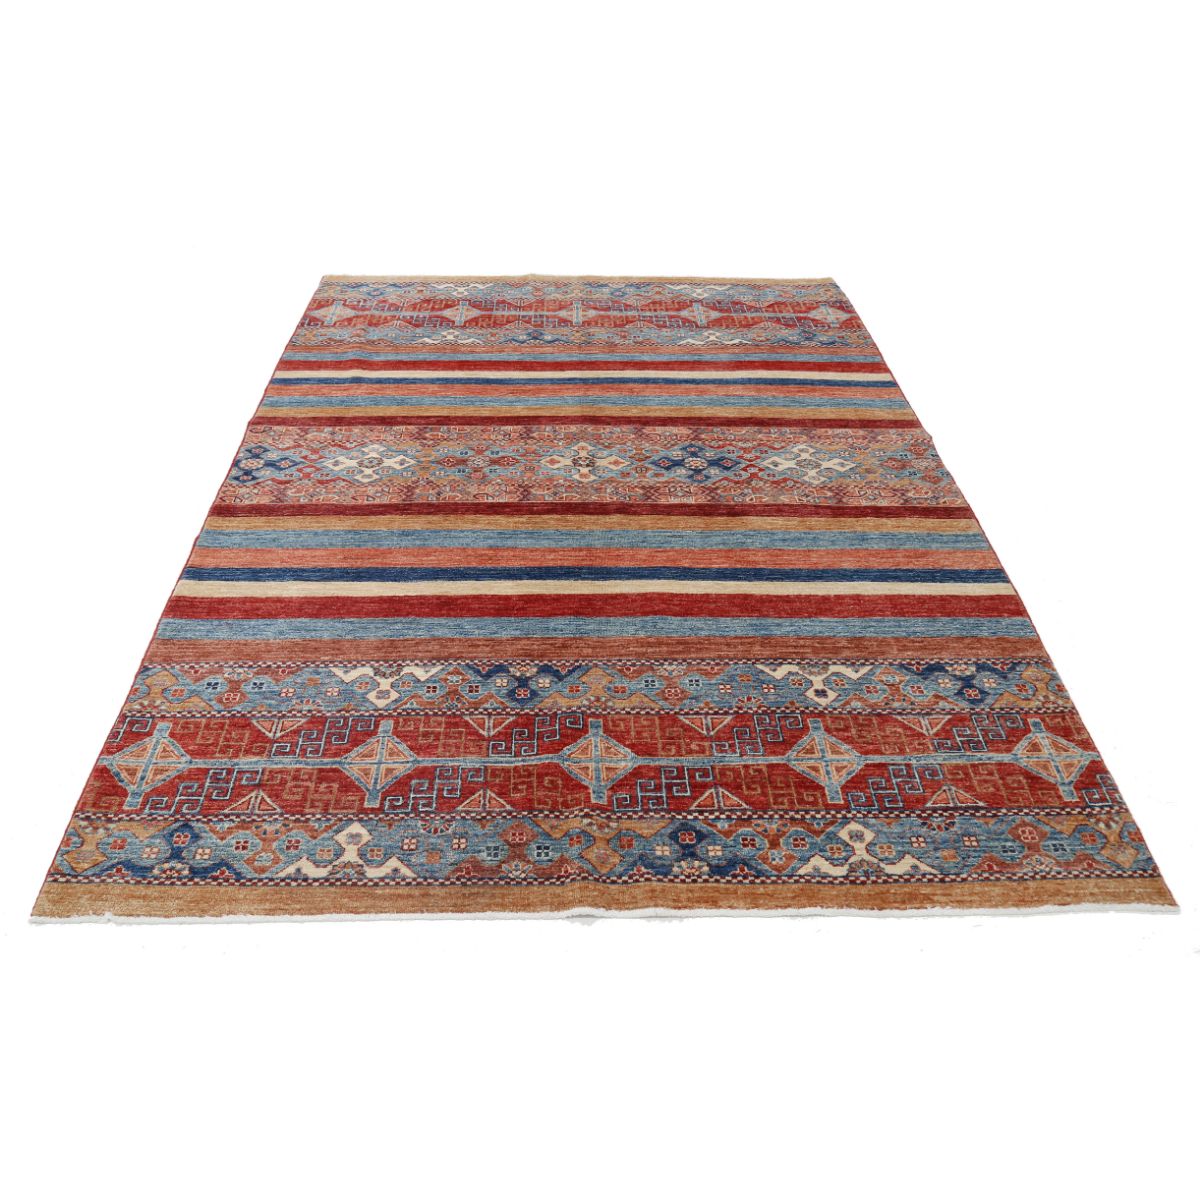 Khurjeen 5'10" X 7'8" Wool Hand-Knotted Rug